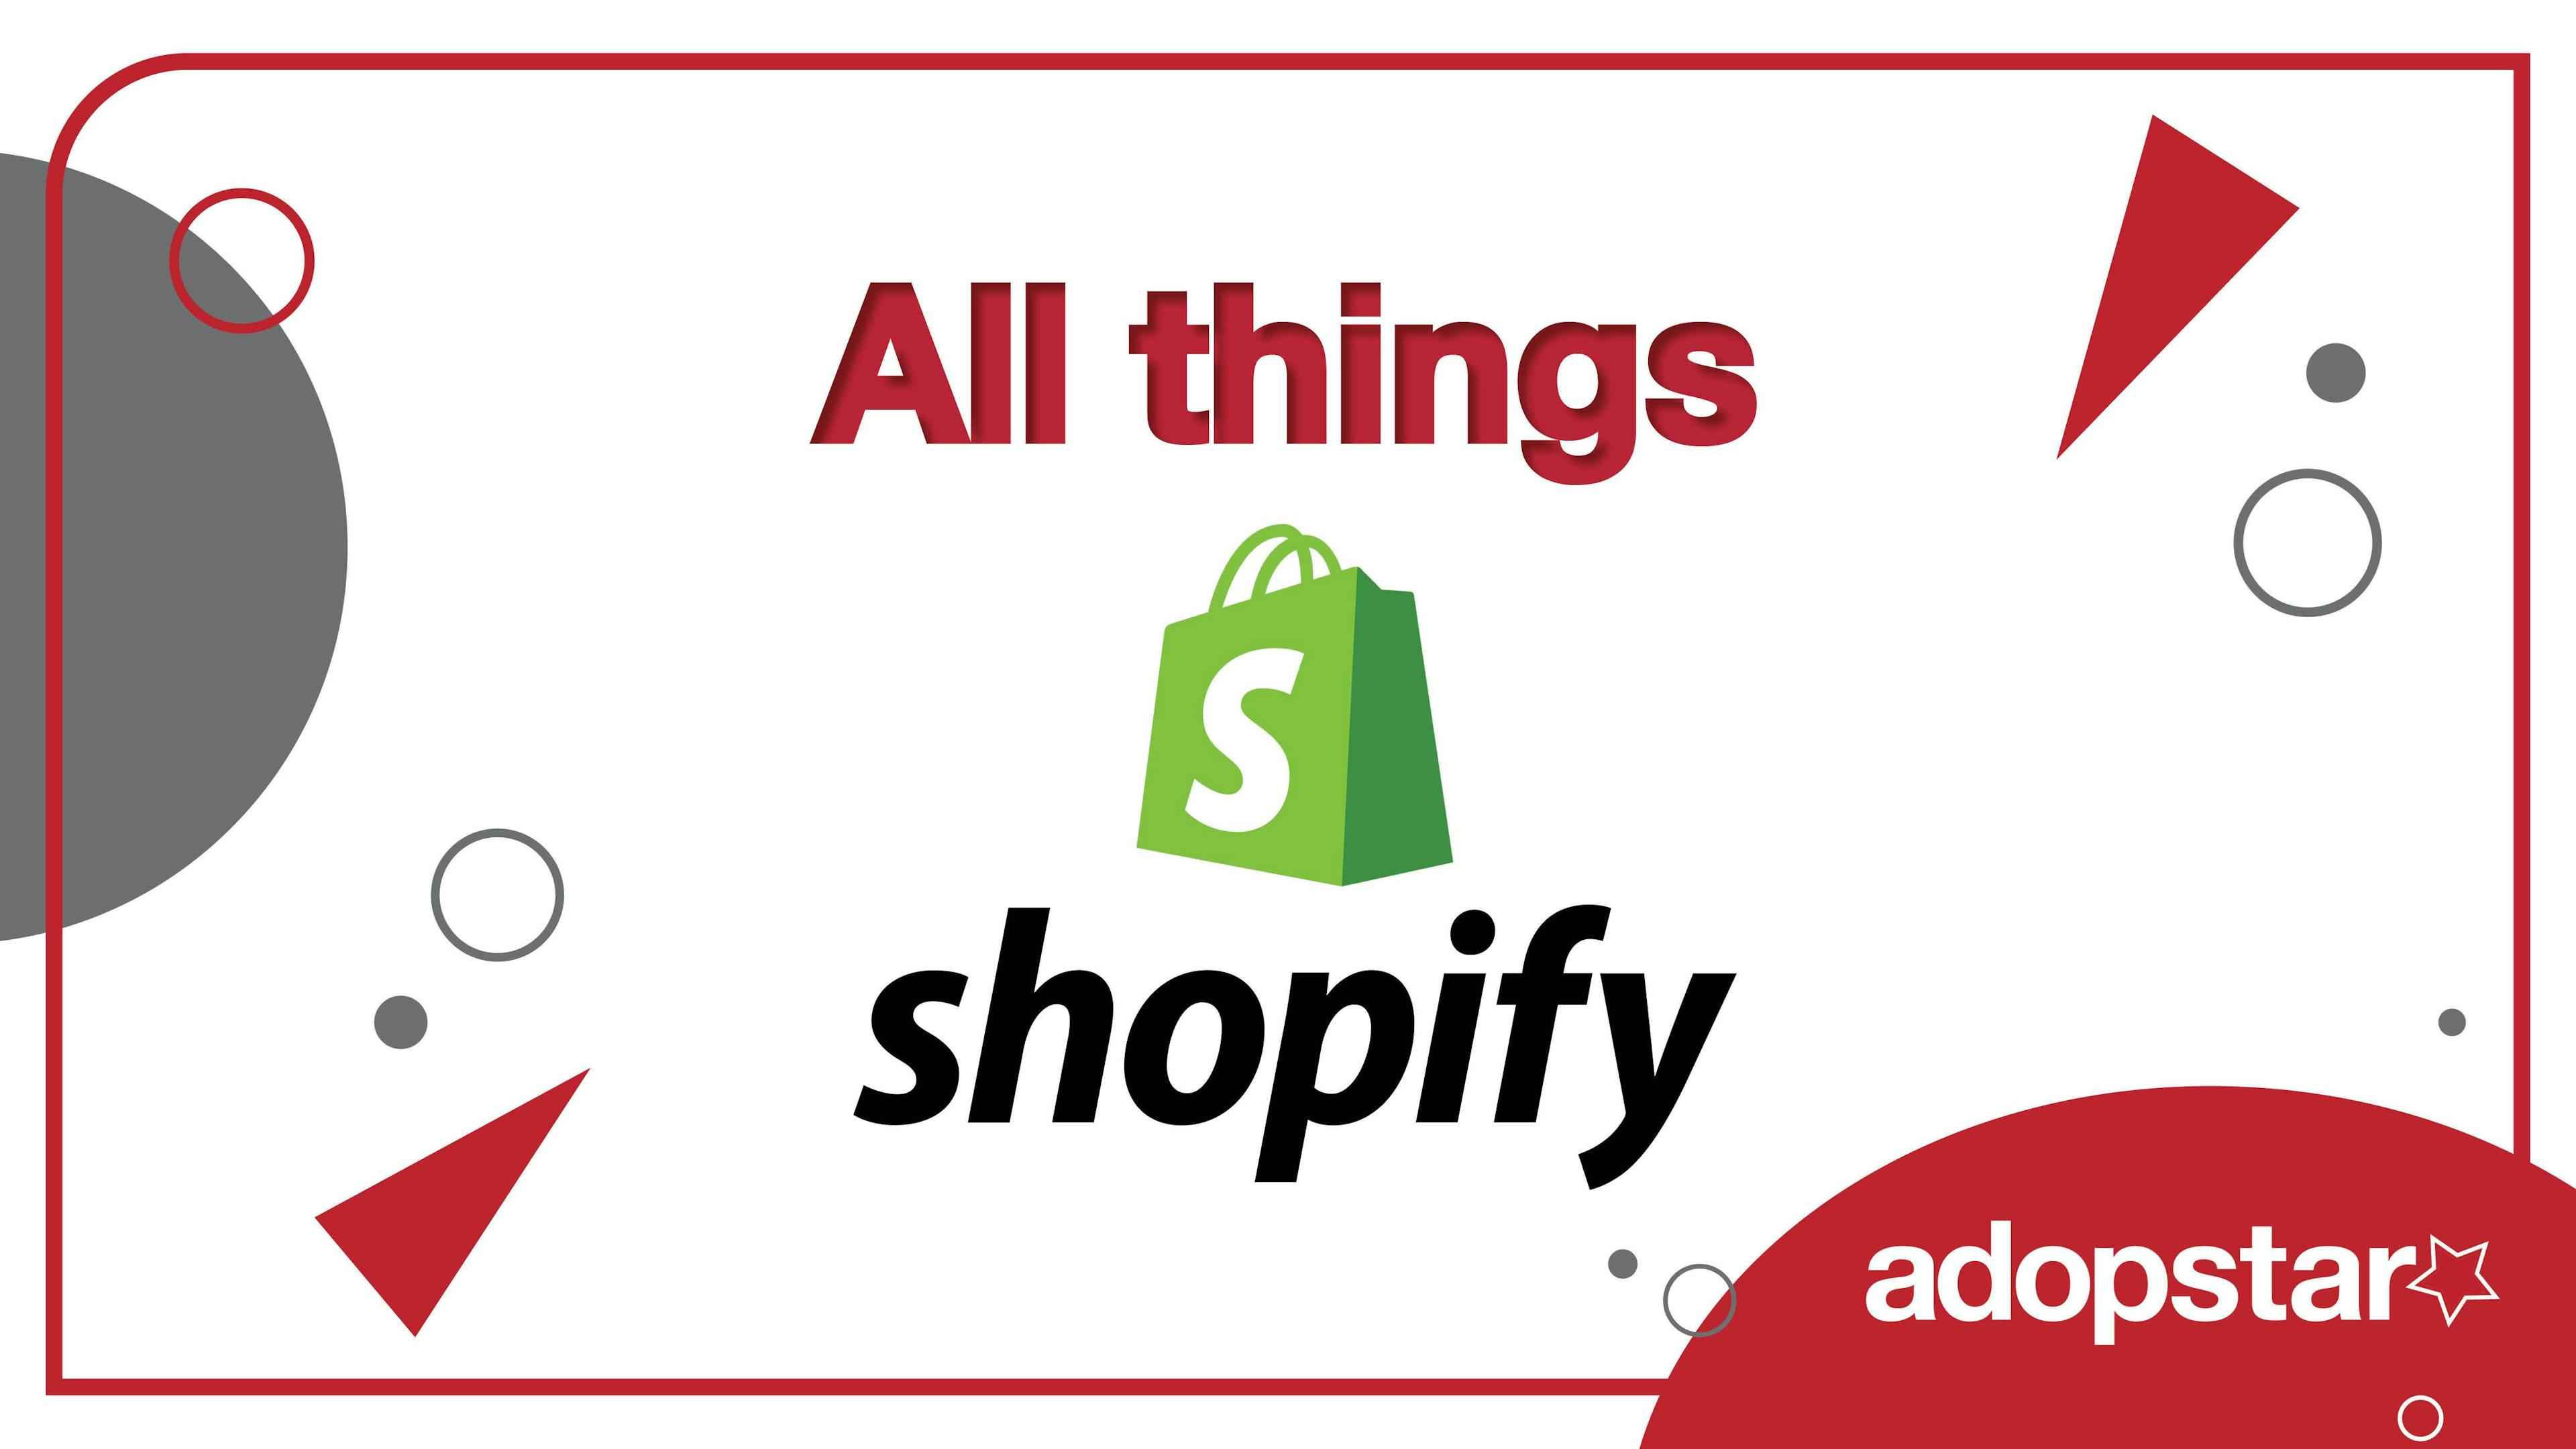 All things Shopify! image